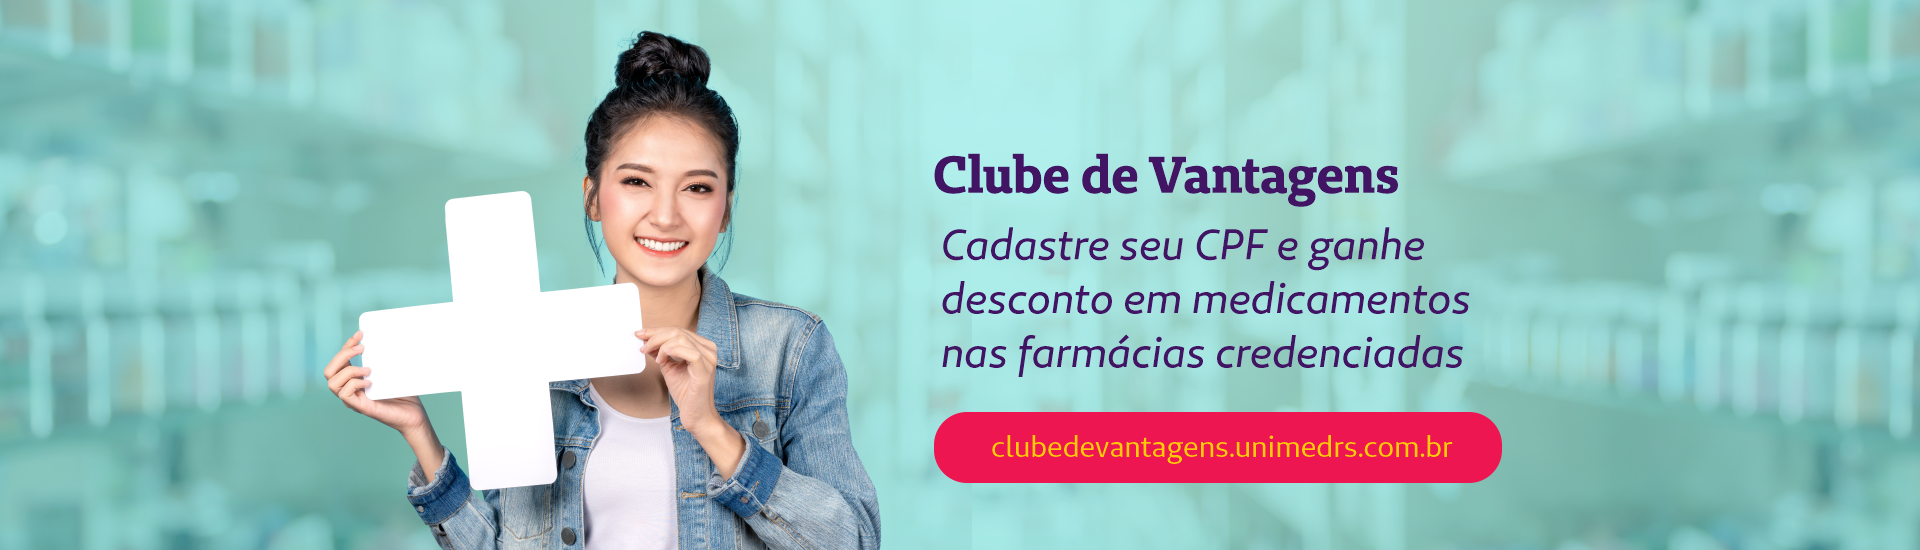 Banner_Clube_1920x550px